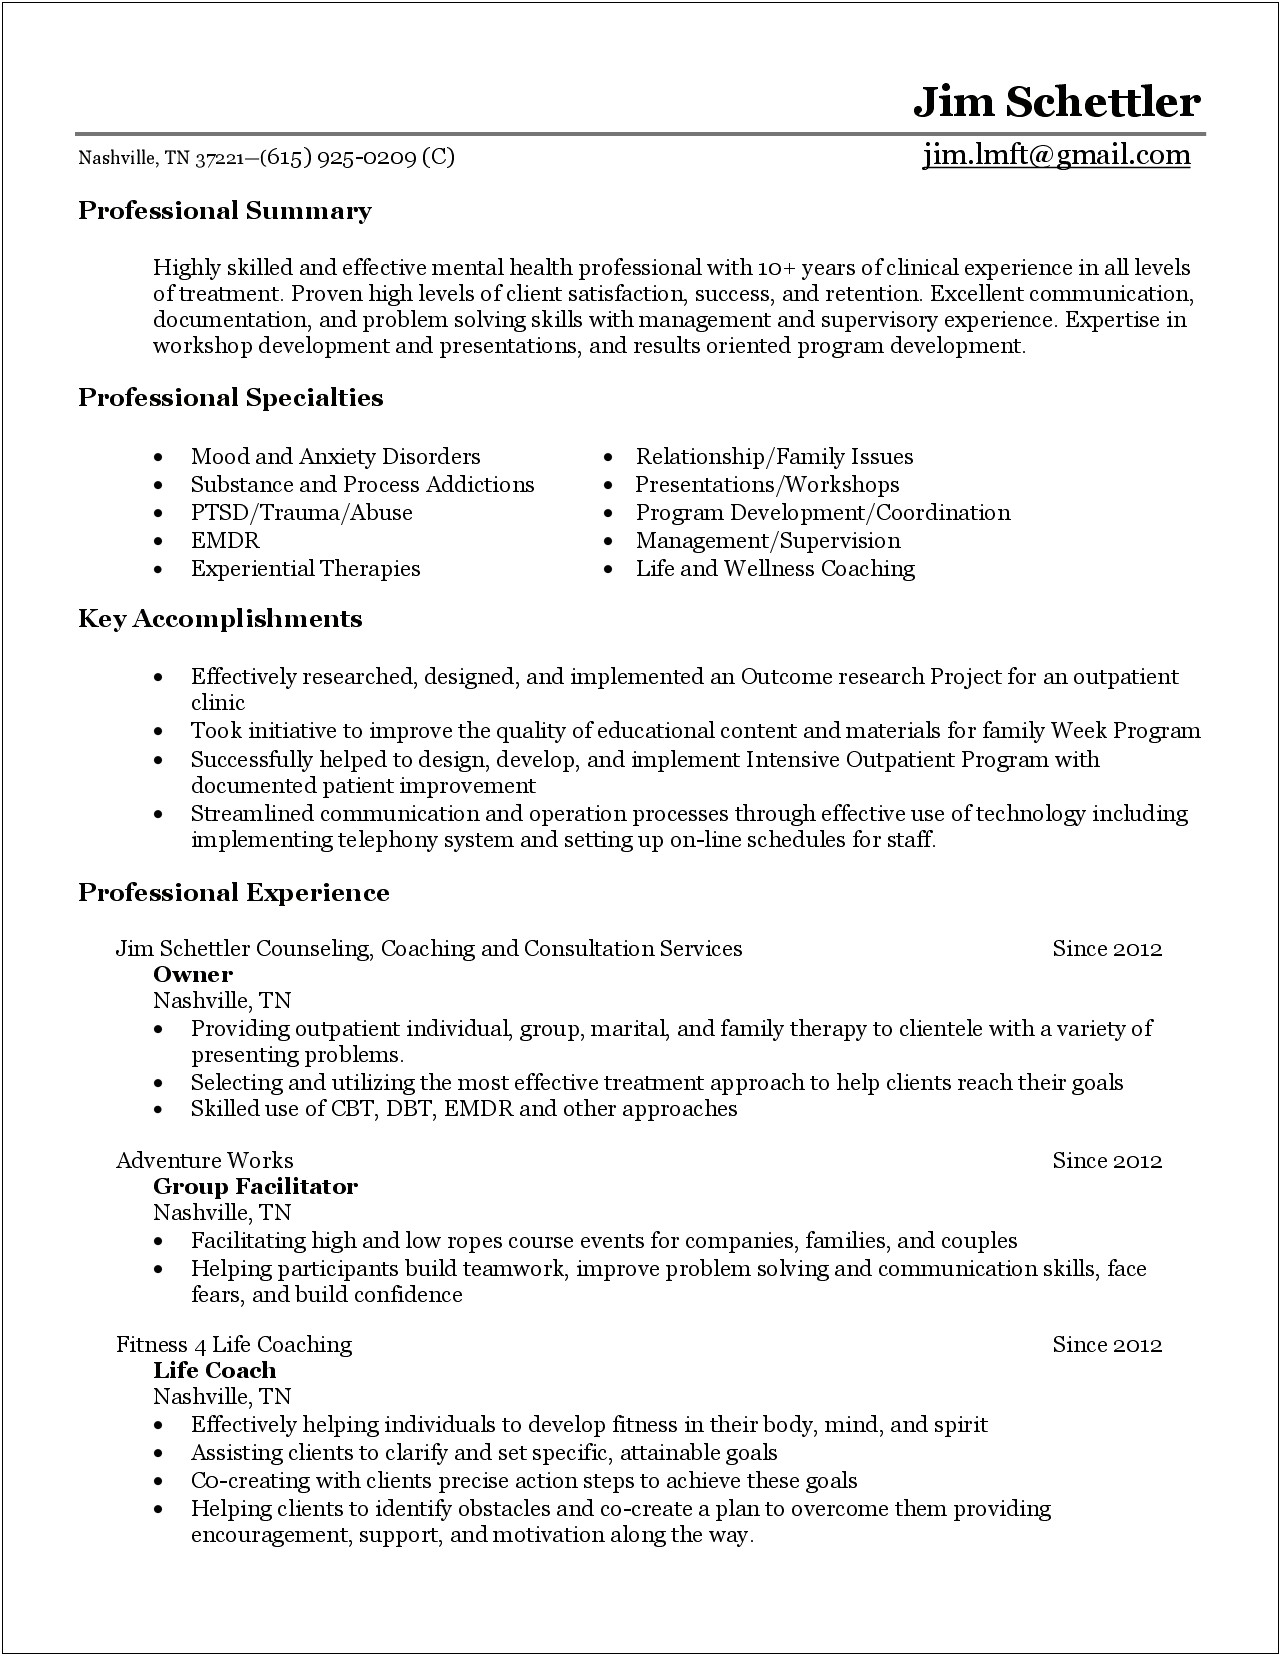 Resume Objective For Counselor In Mental Health